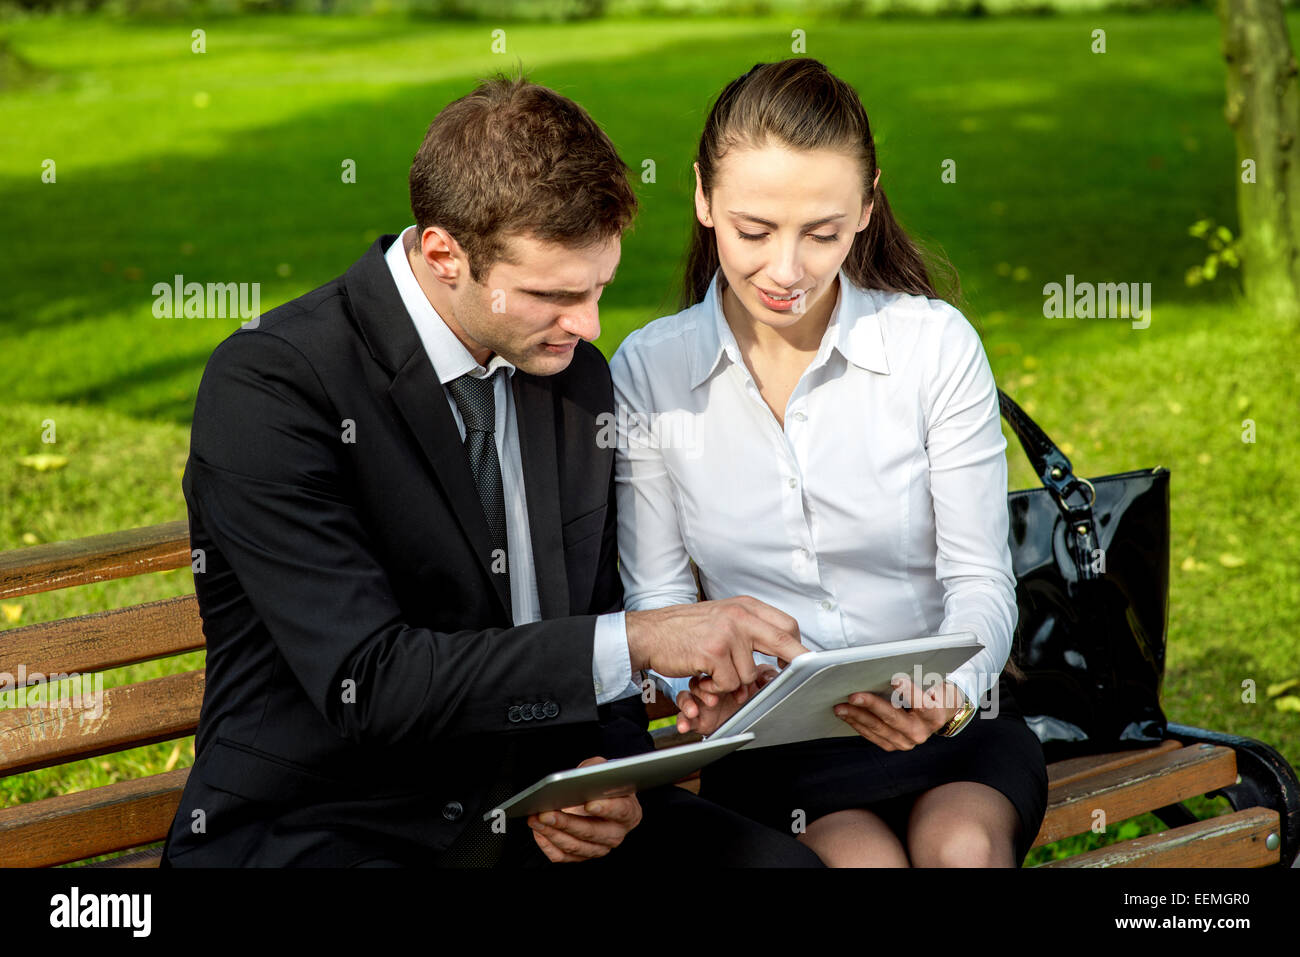 Young Business couple sitting on the bench and reading or working with tablets outdoors. Stock Photo